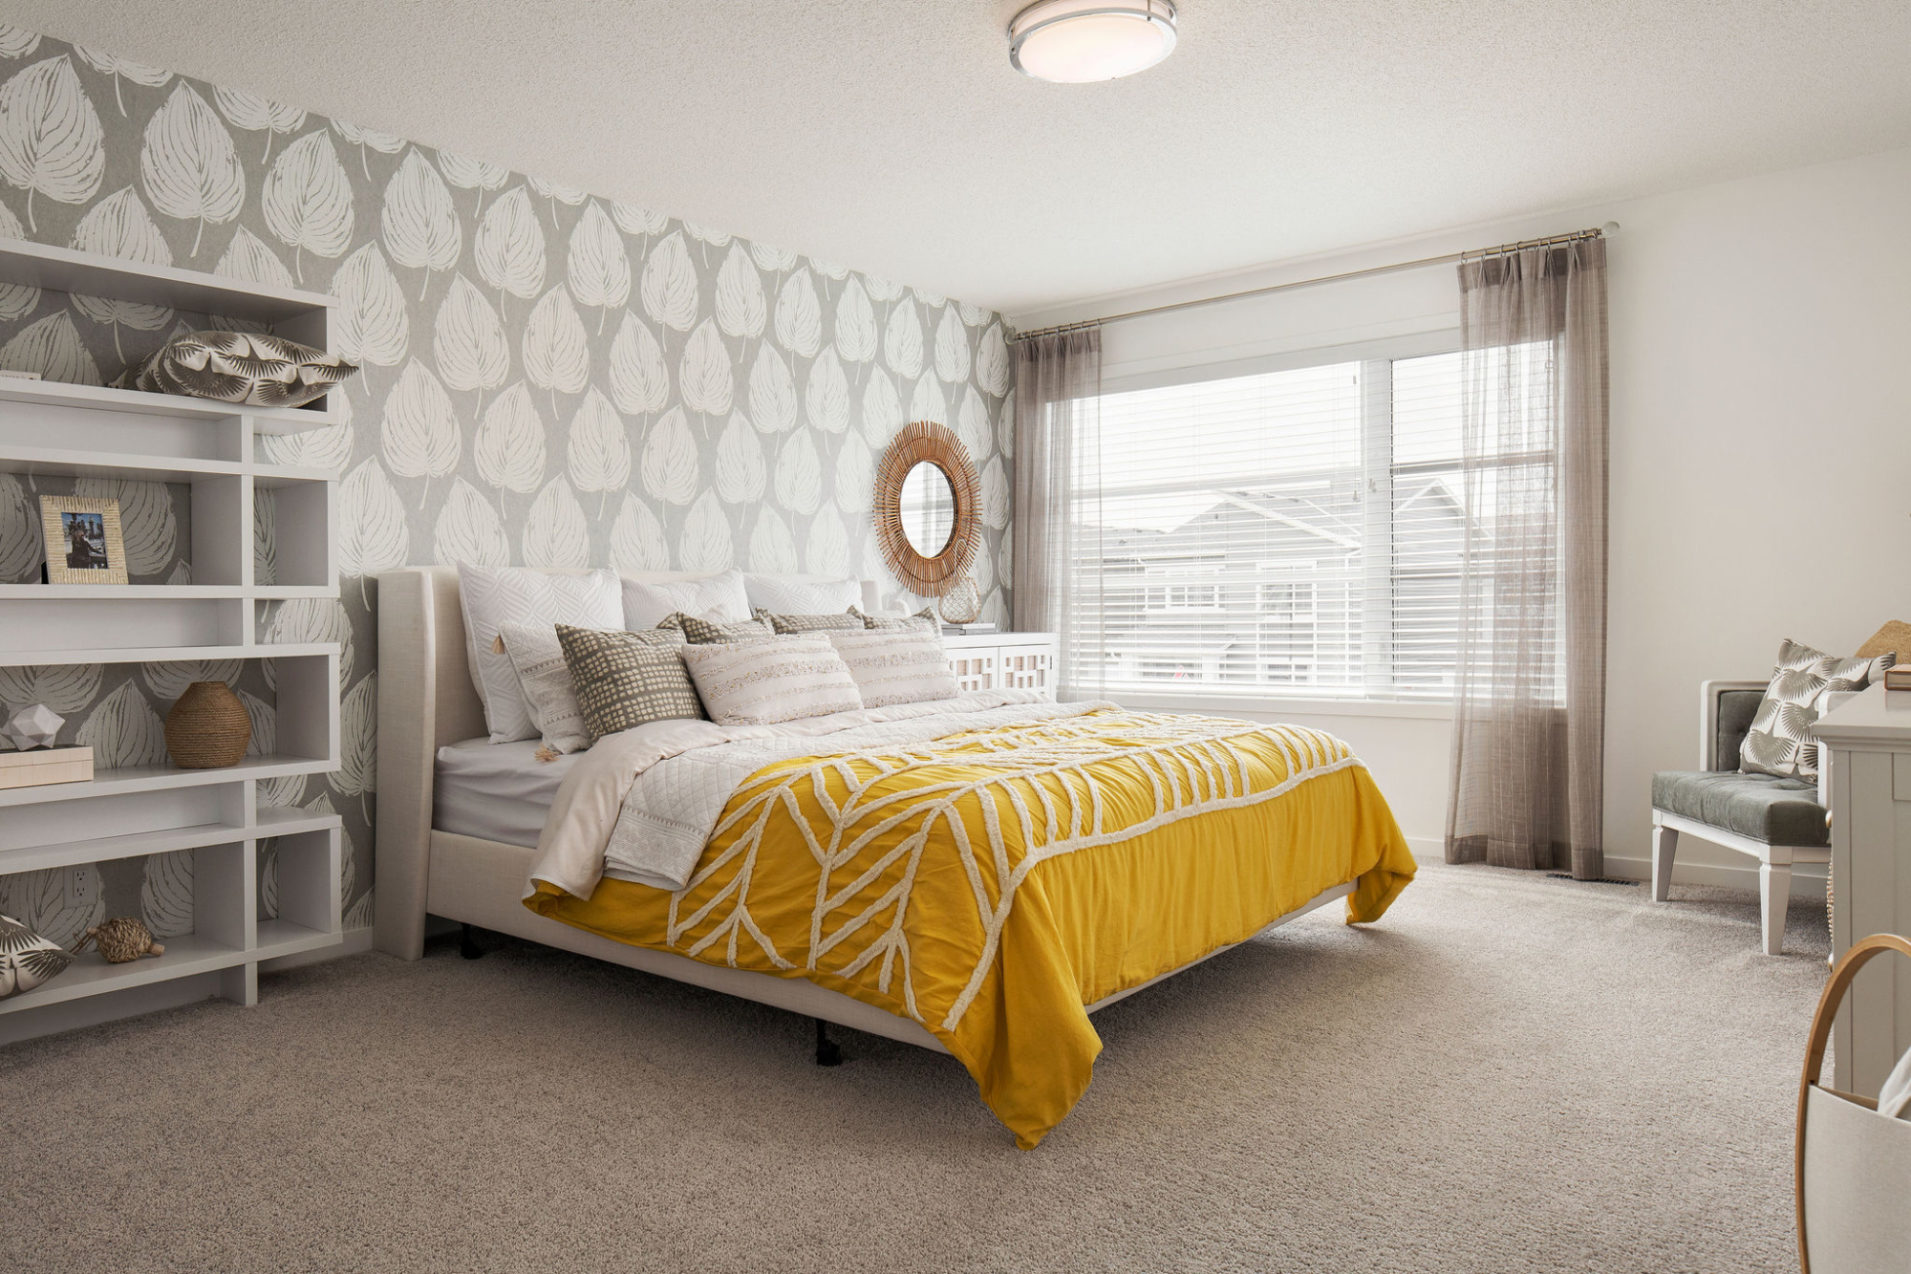 A furnished bedroom with a yellow bed spread and grey walls.